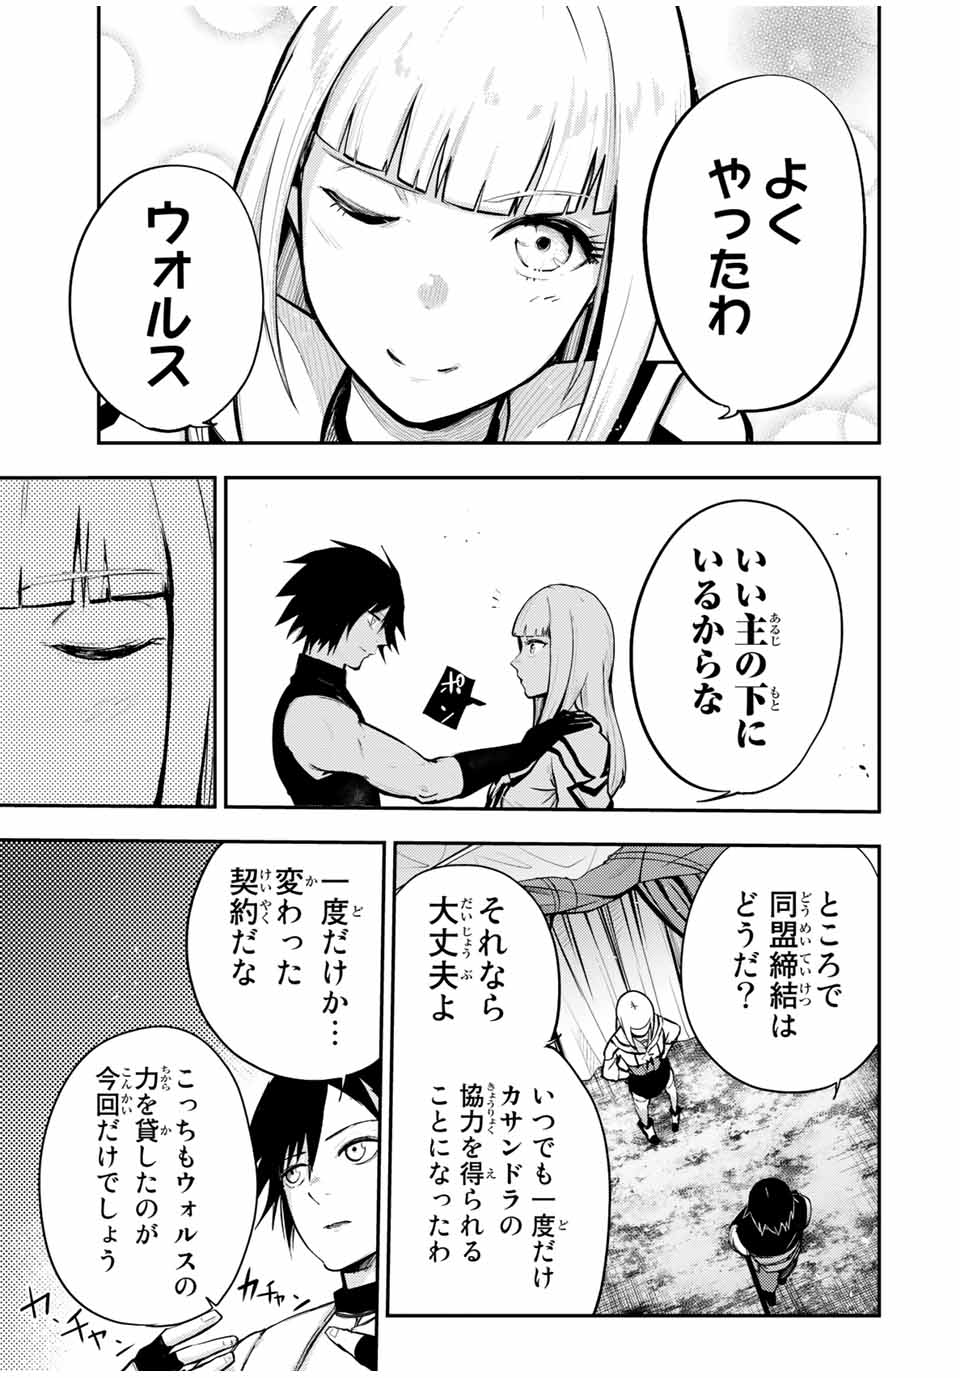 the strongest former prince-; 奴隷転生 ～その奴隷、最強の元王子につき～ 第32話 - Page 3